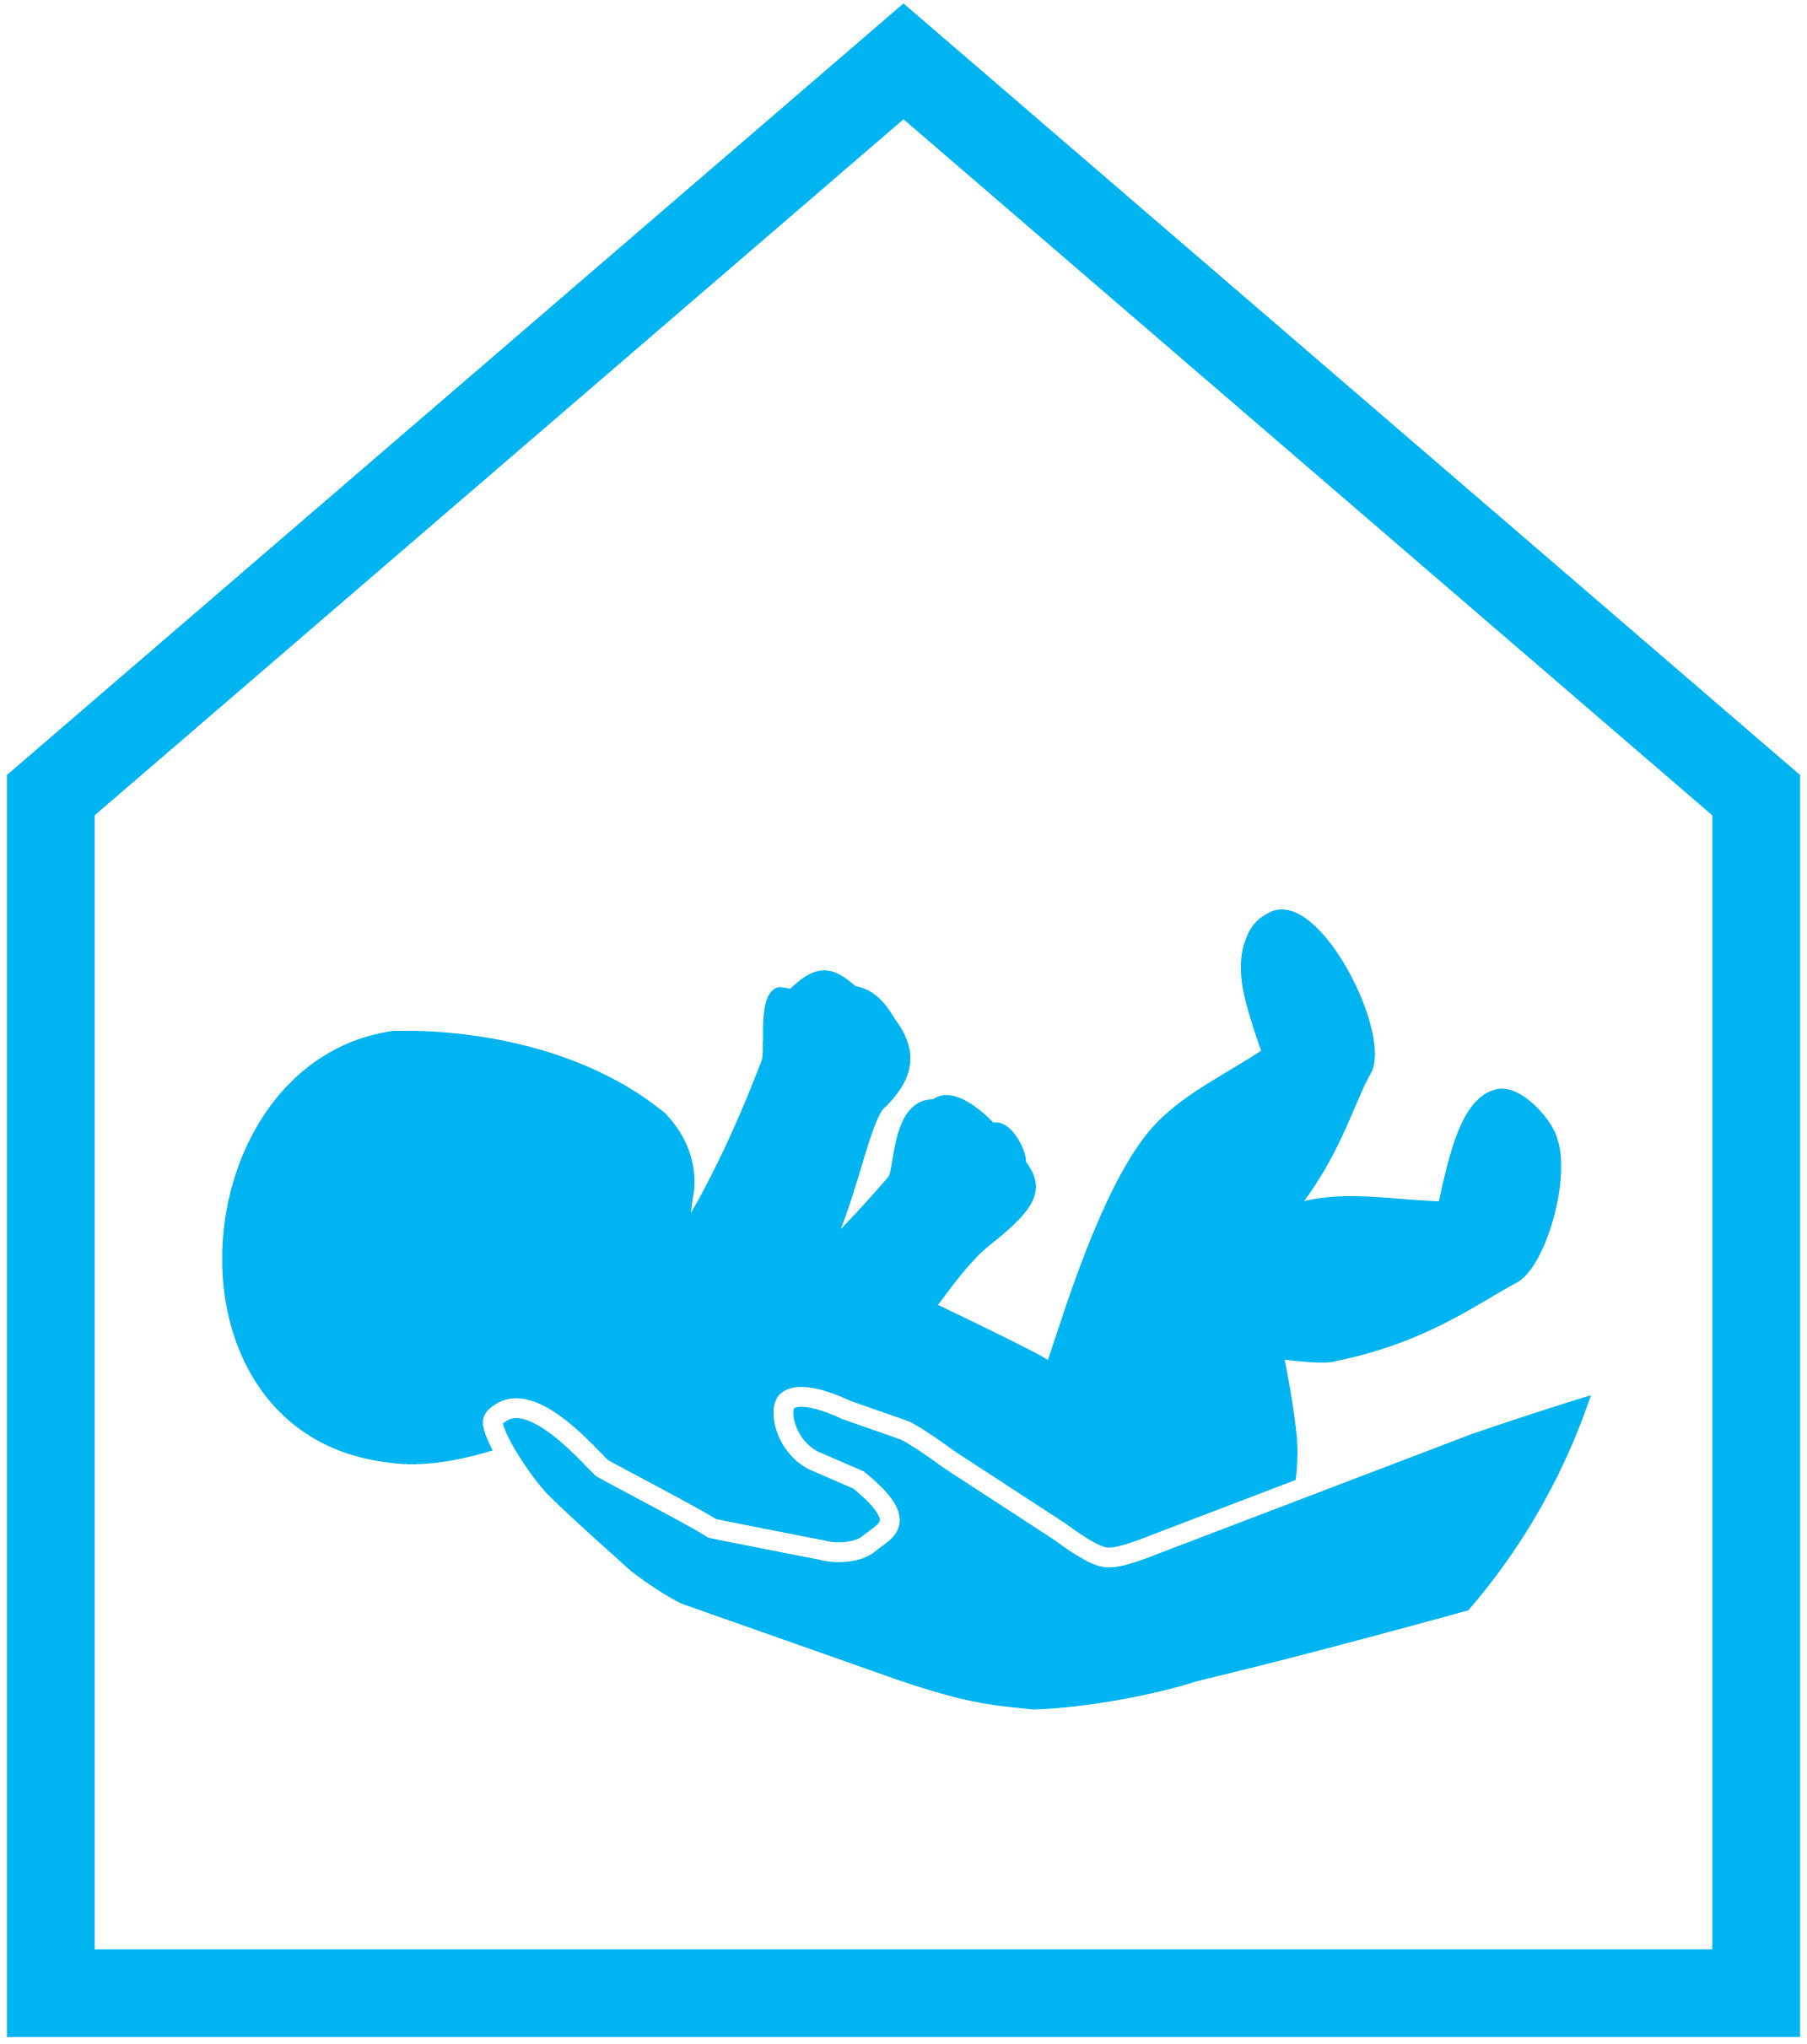 Created in ‘01 by @CountyofLA Supervisor @DonKnabe, Safe Surrender allows a parent or legal guardian to handover an infant, three days old or younger